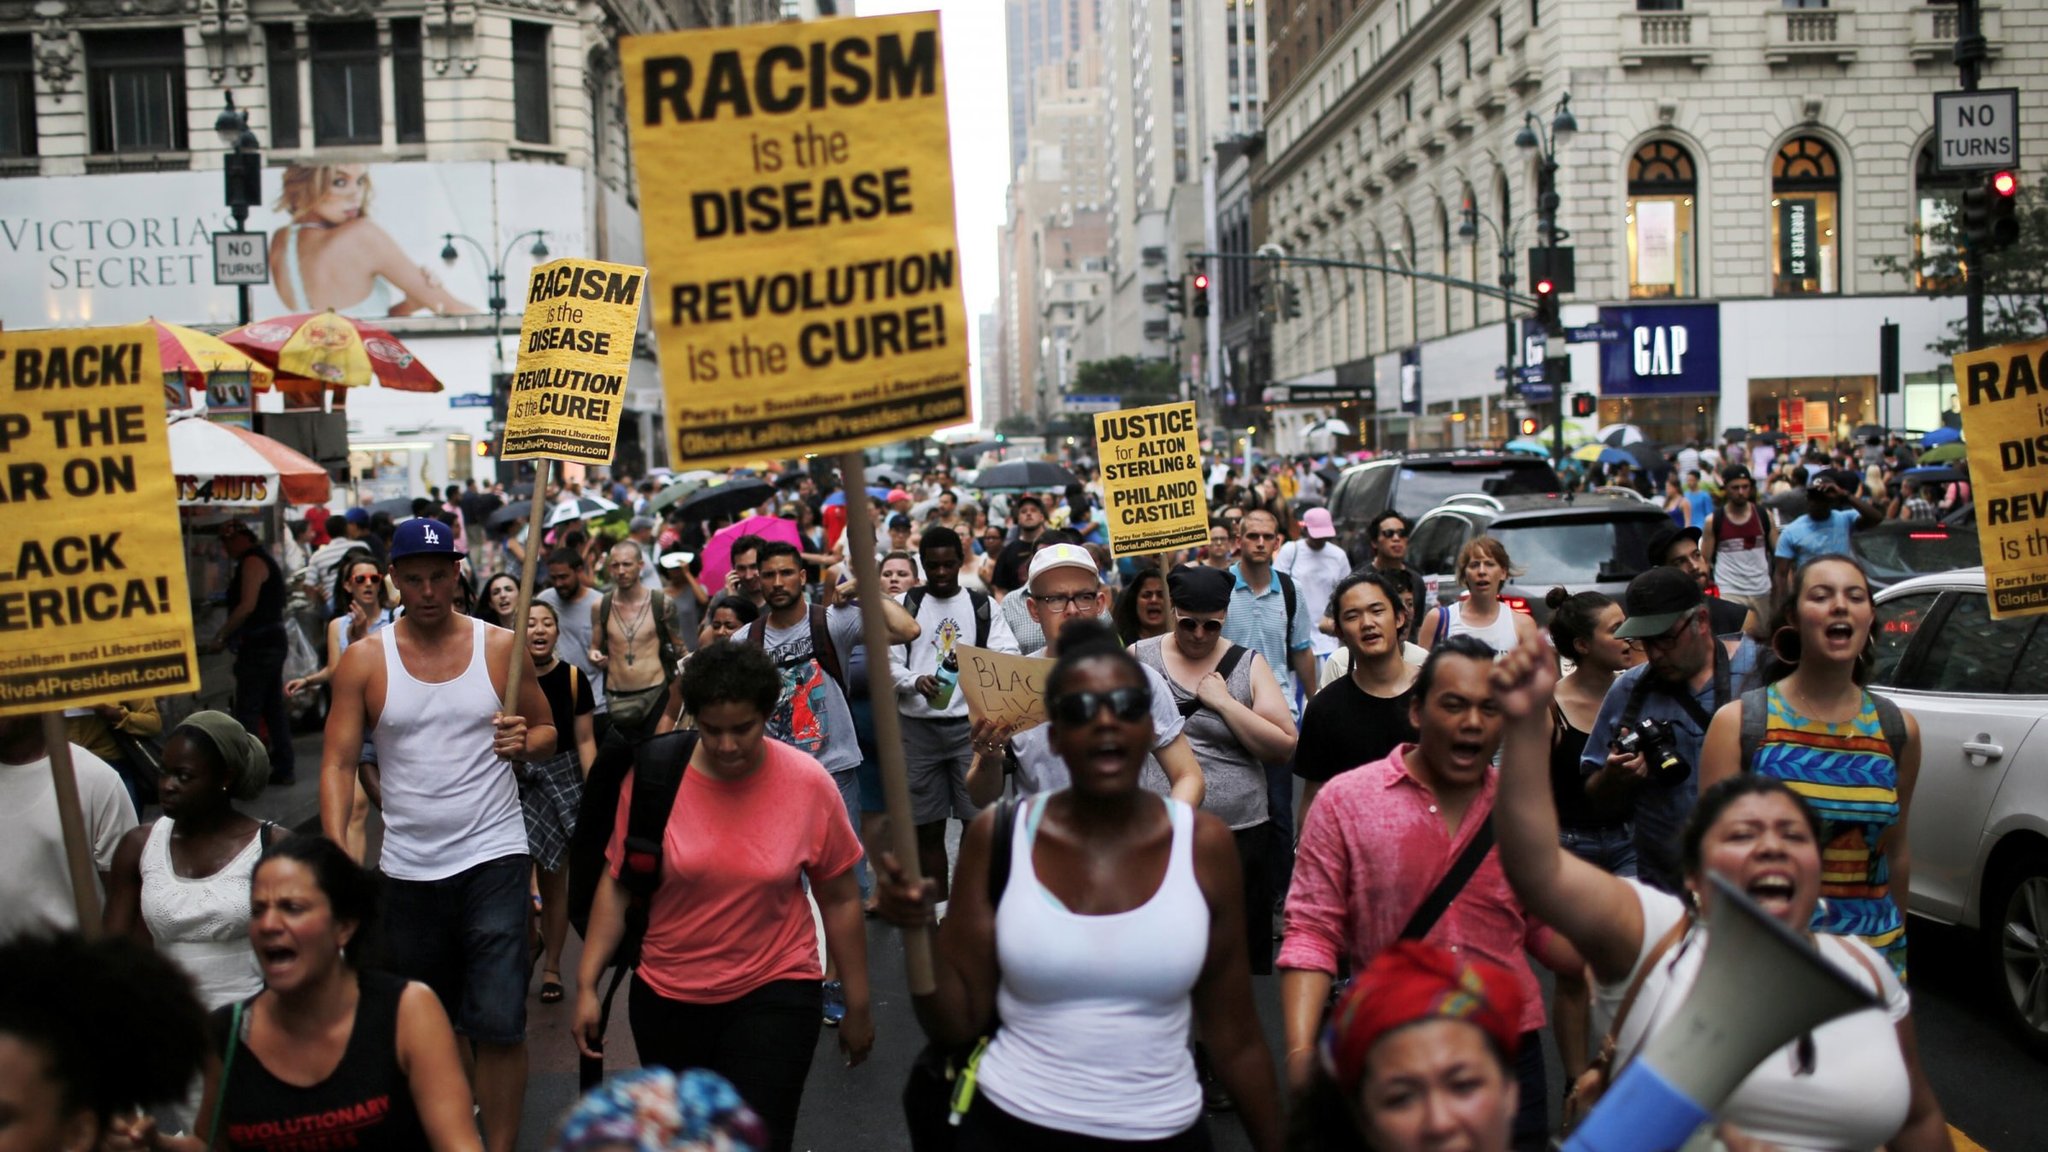 Protesters marching in the streets of New York after the killings of Alton Sterling and Philando Castile (Photo: Eduardo Munoz/Reuters)